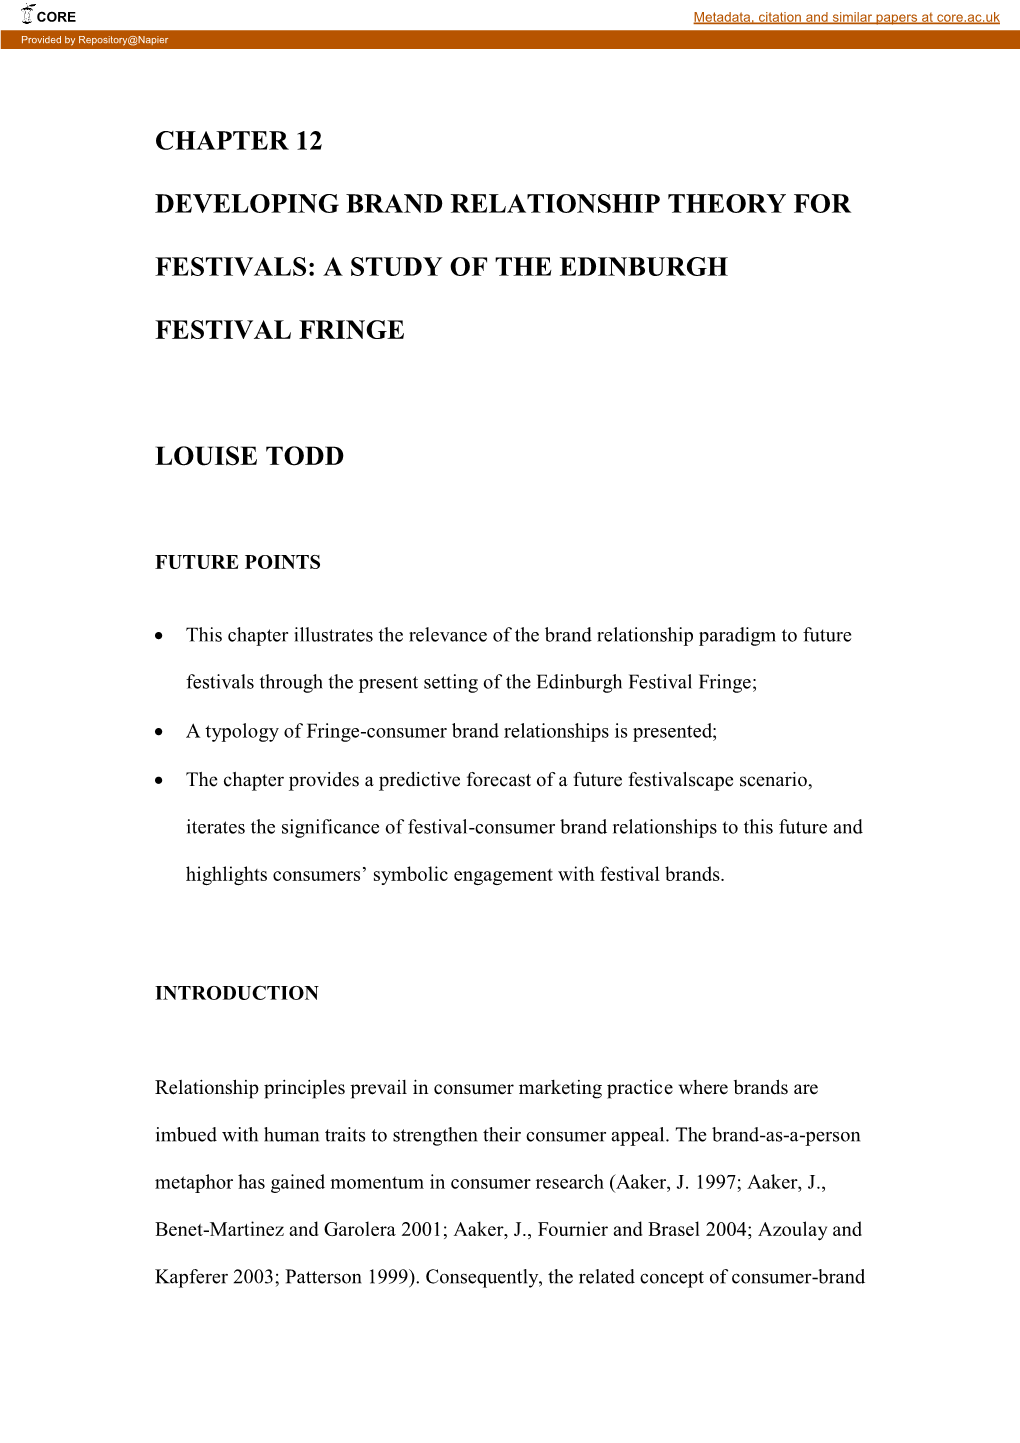 Chapter 12 Developing Brand Relationship Theory for Festivals